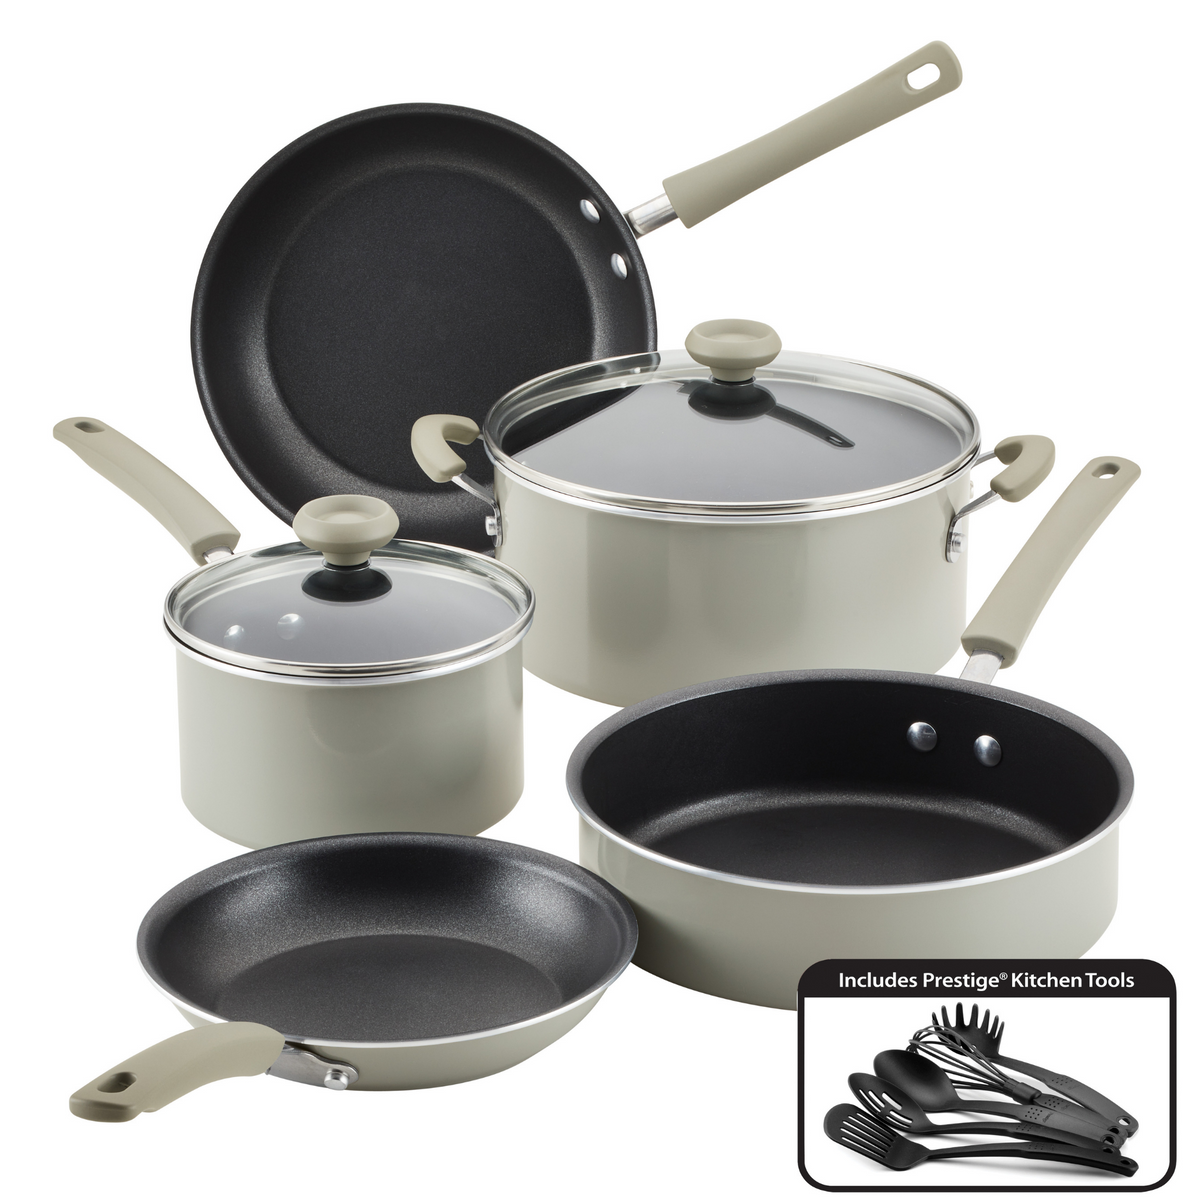 12 Piece Farberware Cookware Set - Aluminum Clad Stainless Steel - Made in  USA